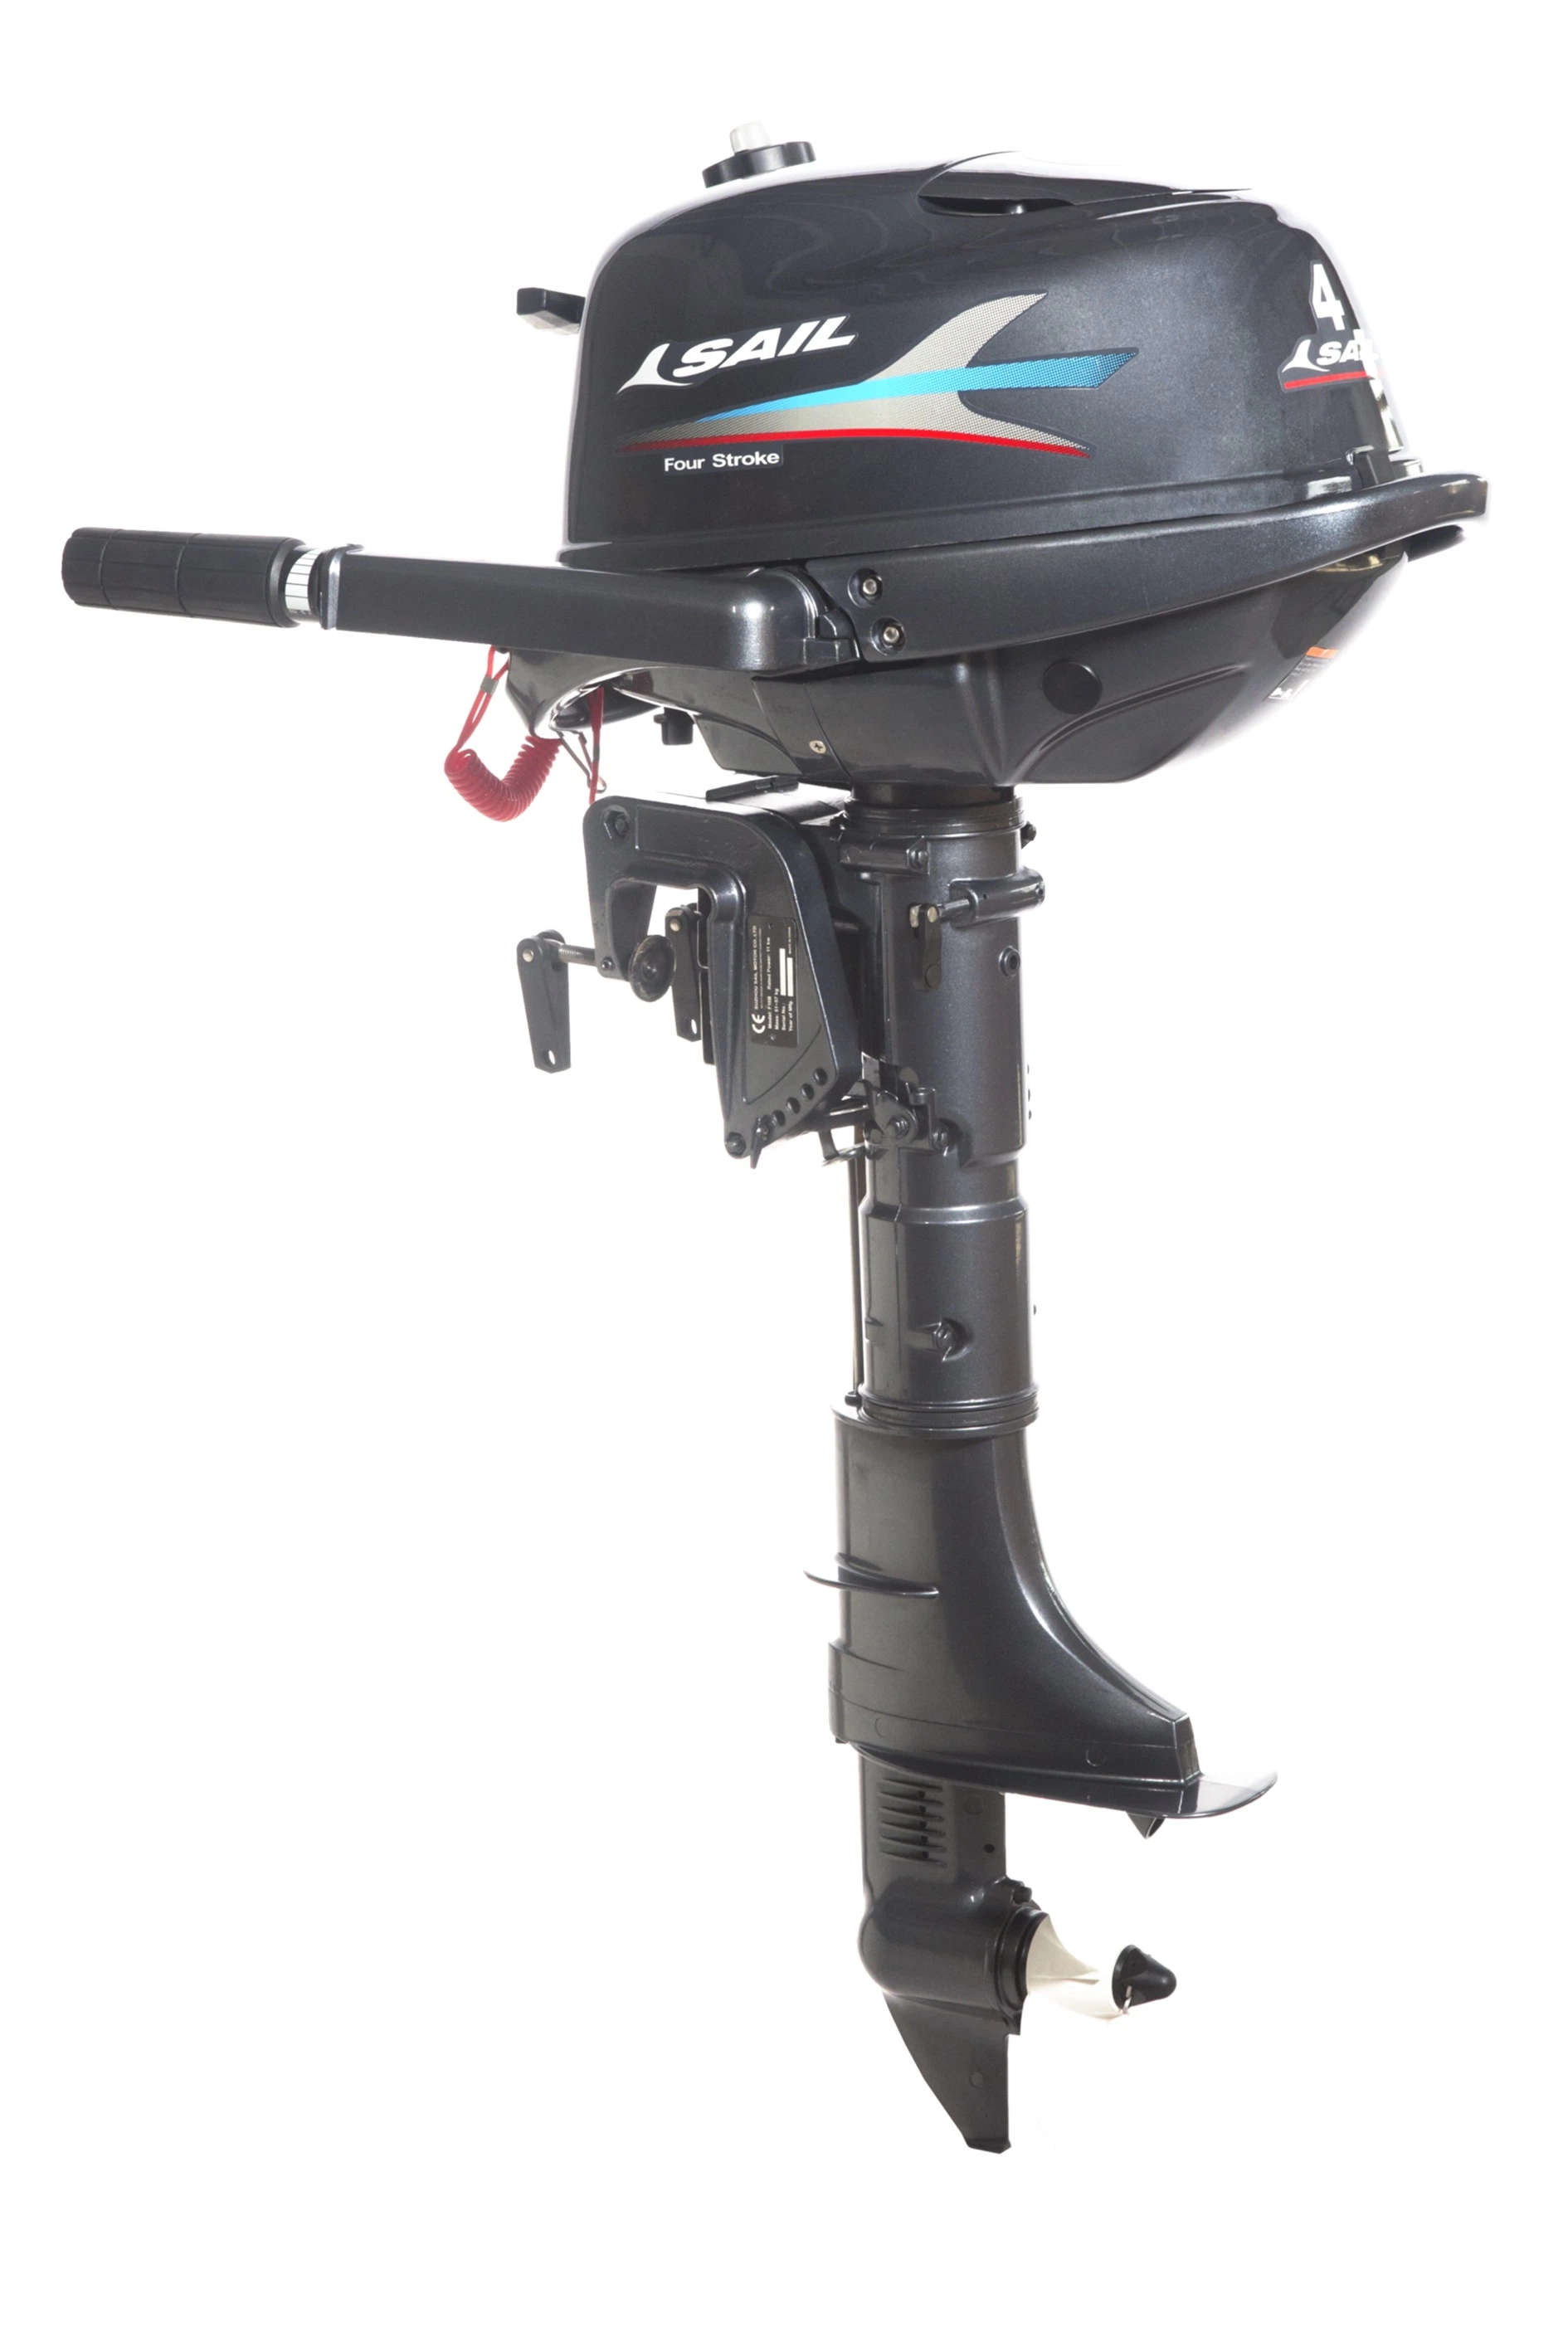 Sail 4 Stroke 4HP Outboard Motor / Outboard Engine / Boat Engine